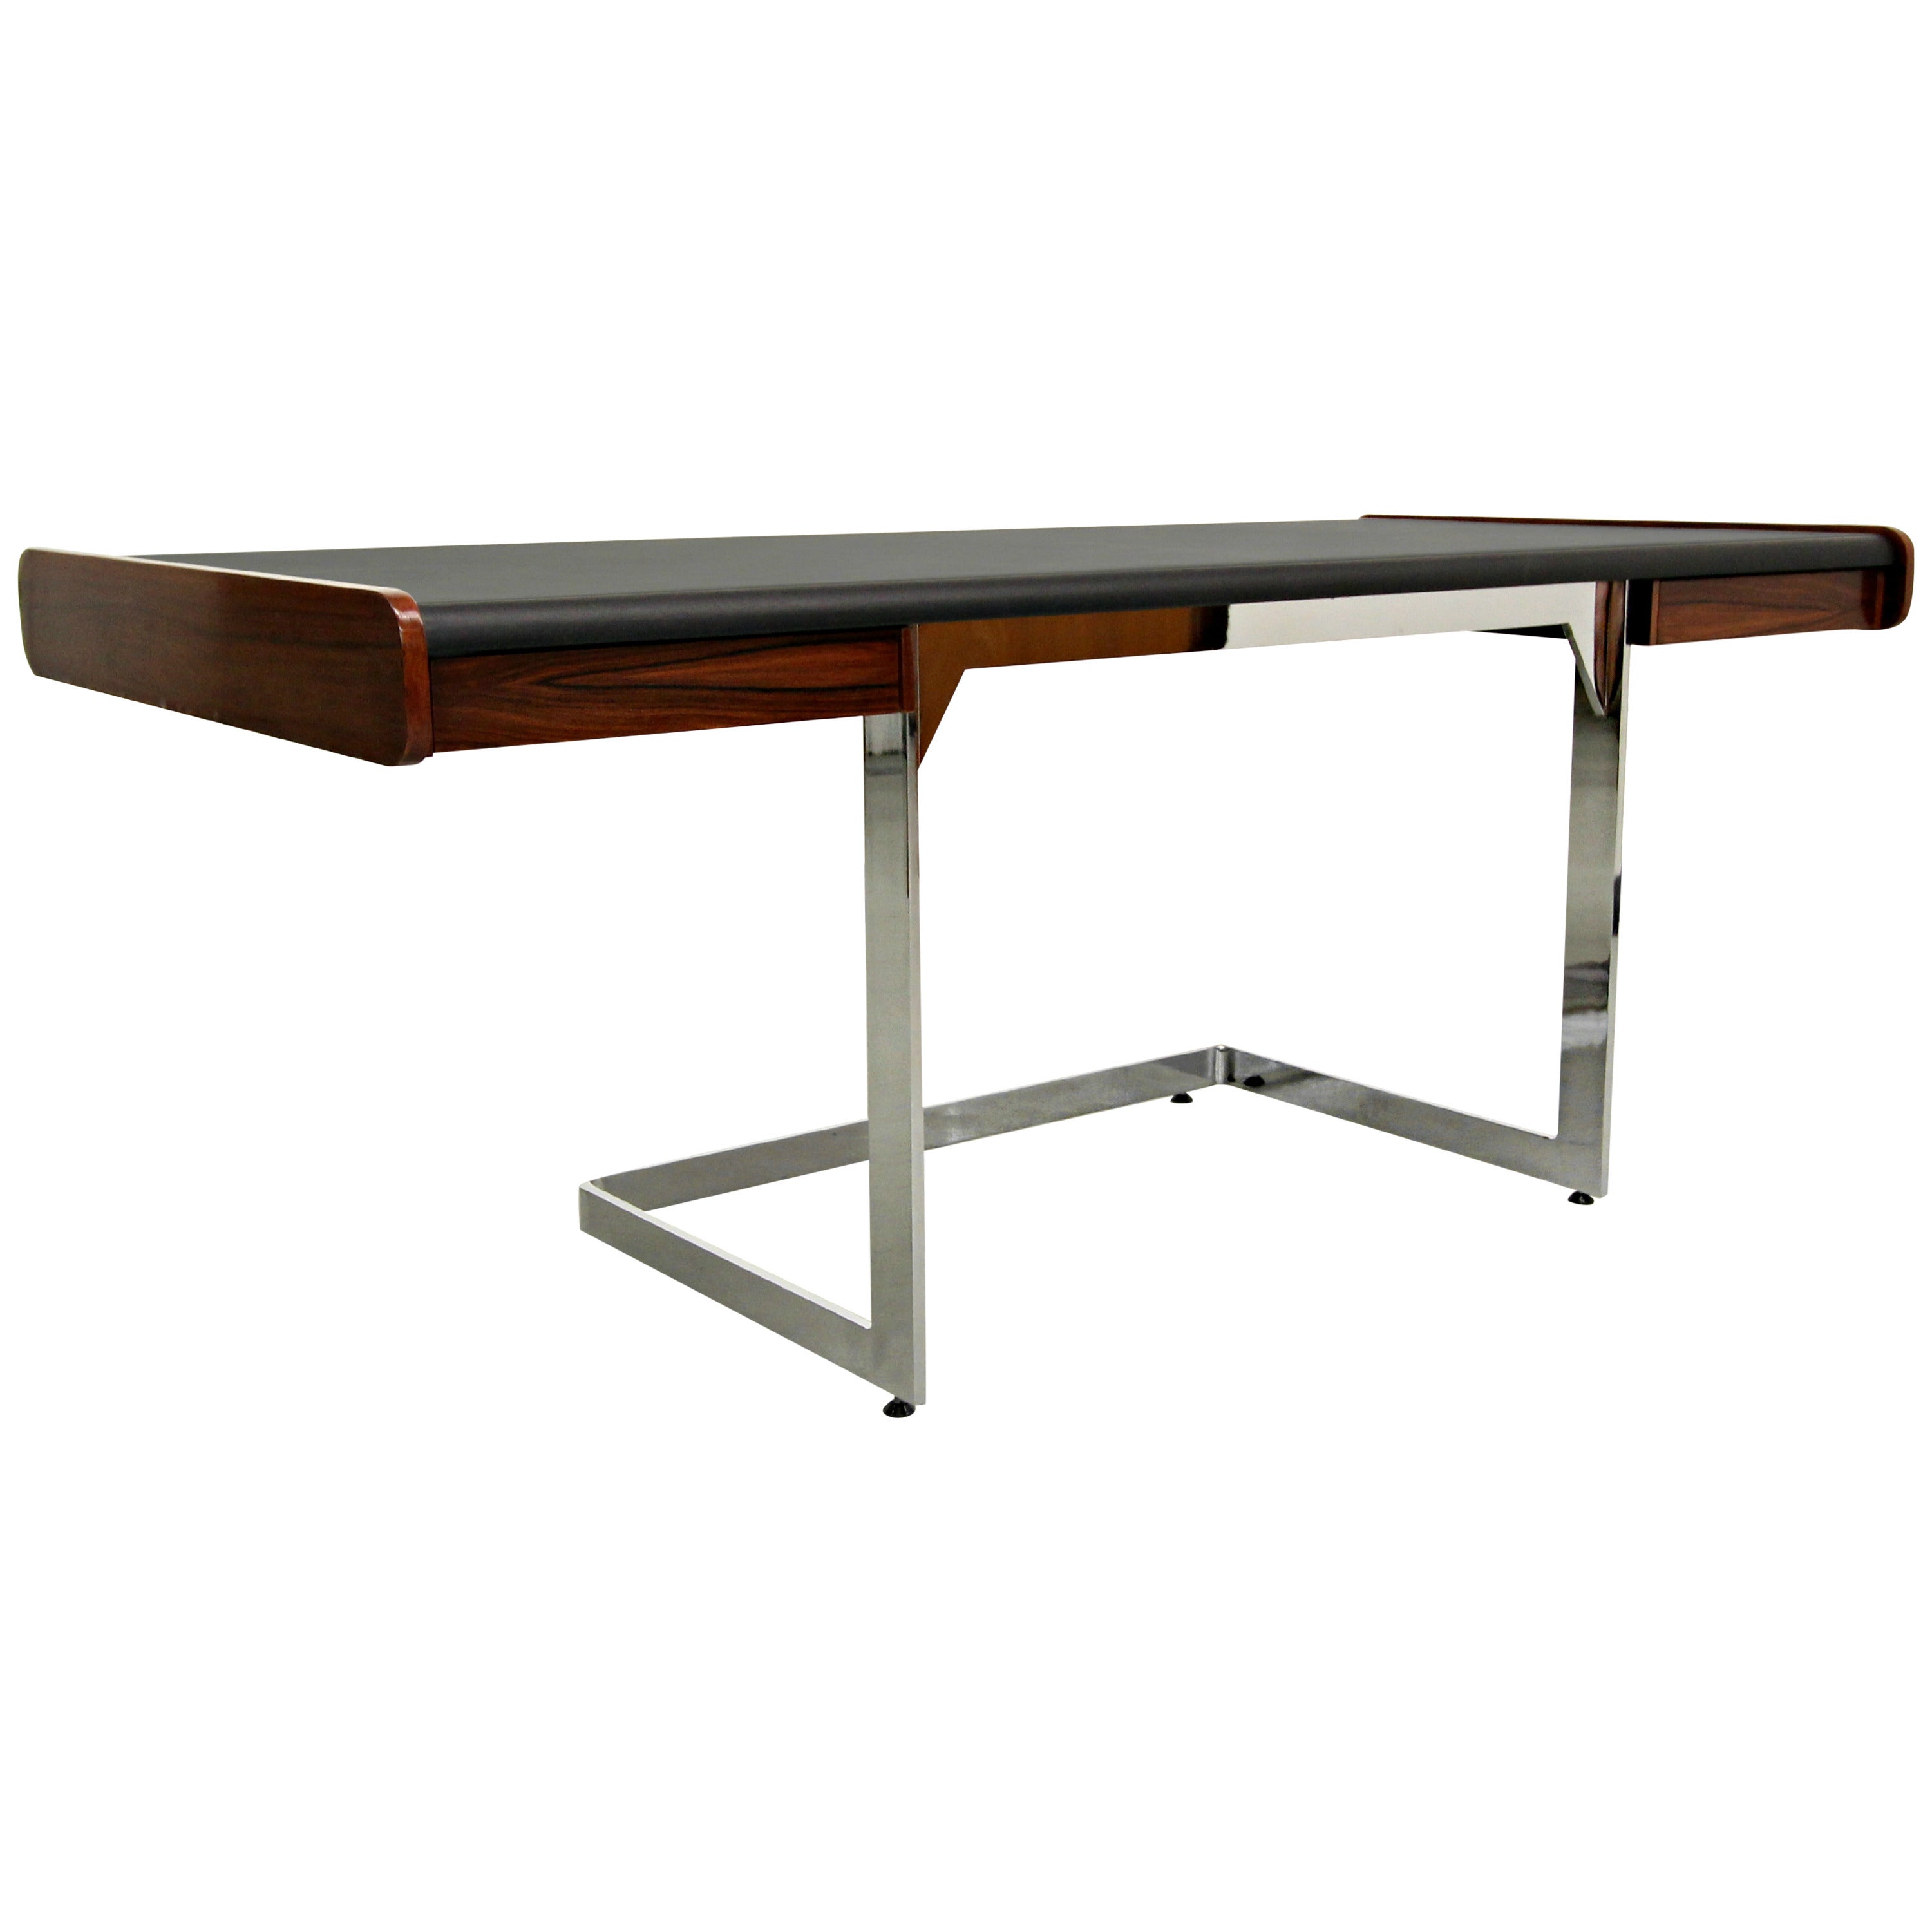 Midcentury Rosewood and Chrome Cantilever Desk by Ste-Marie & Laurent